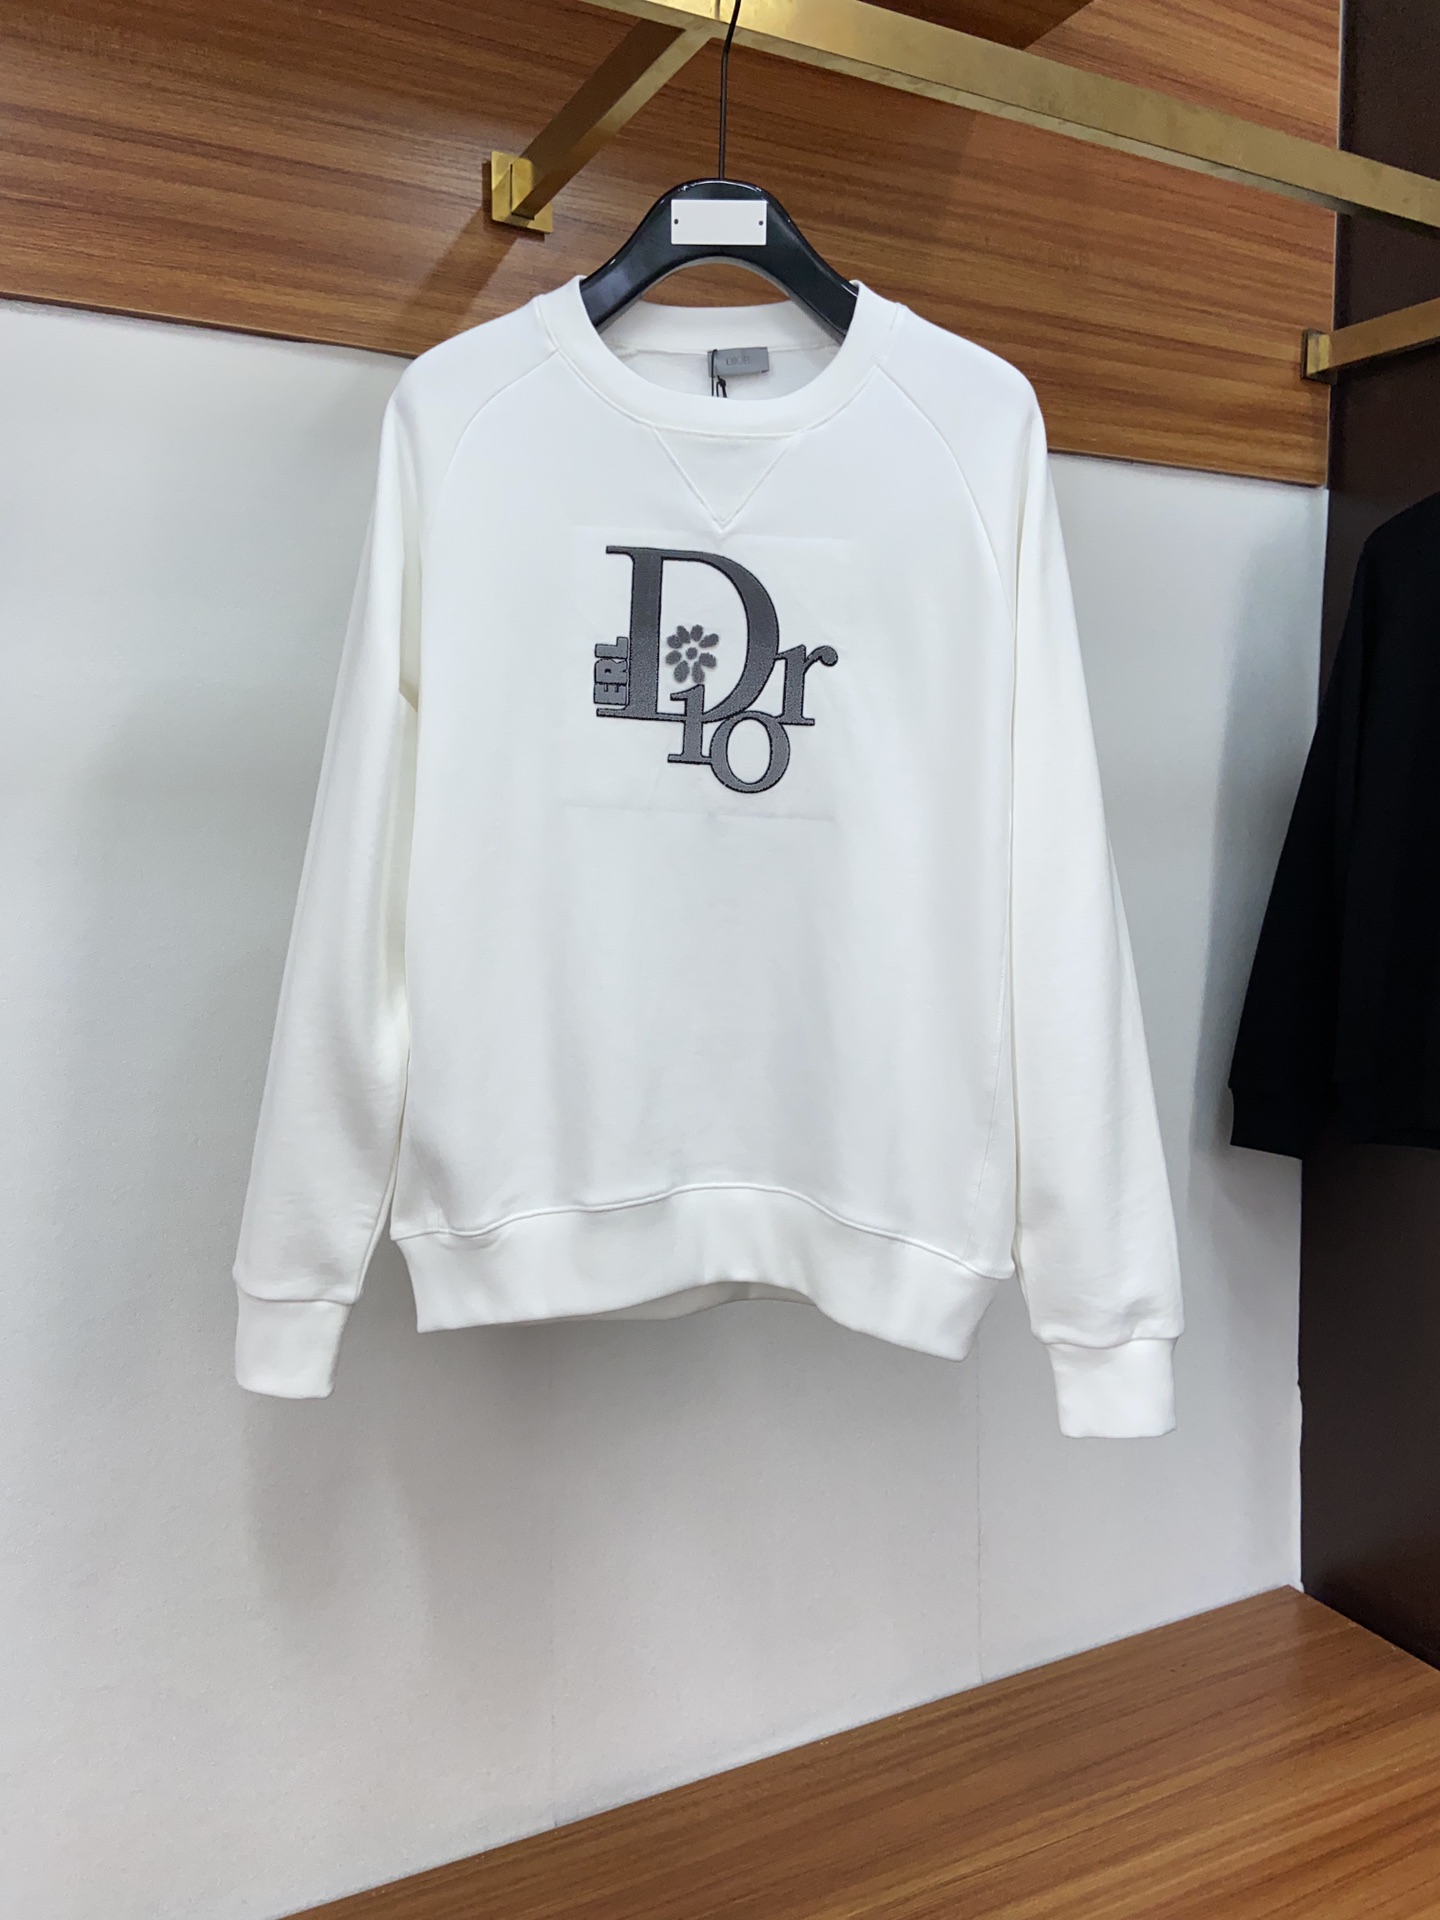 Dior Copy
 Clothing Knit Sweater Sweatshirts Black White Embroidery Knitting Fall/Winter Collection Casual